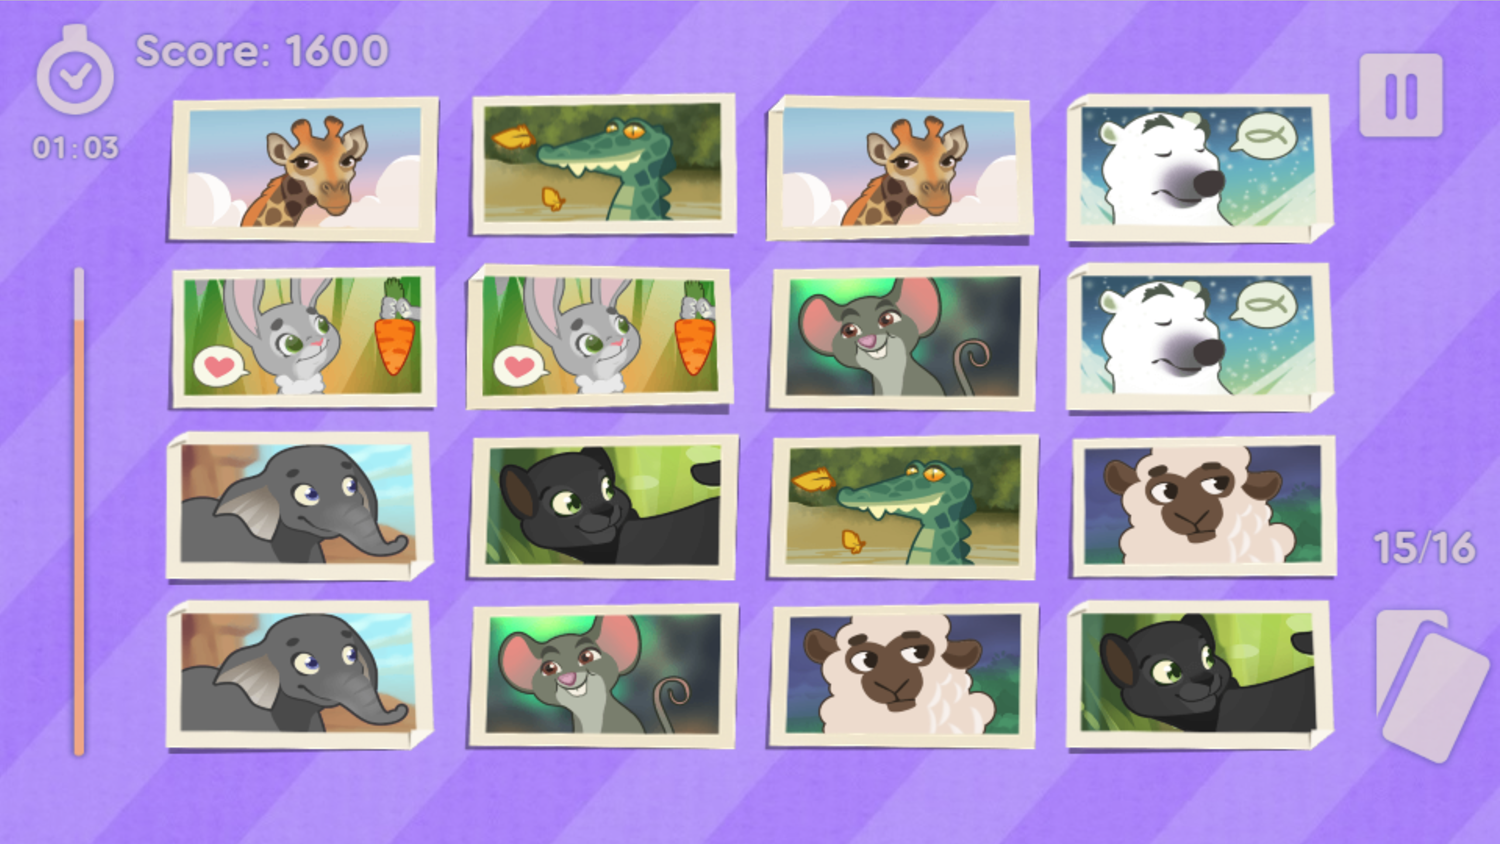 Scratch and Match Animal Game Level Complete Screenshot.